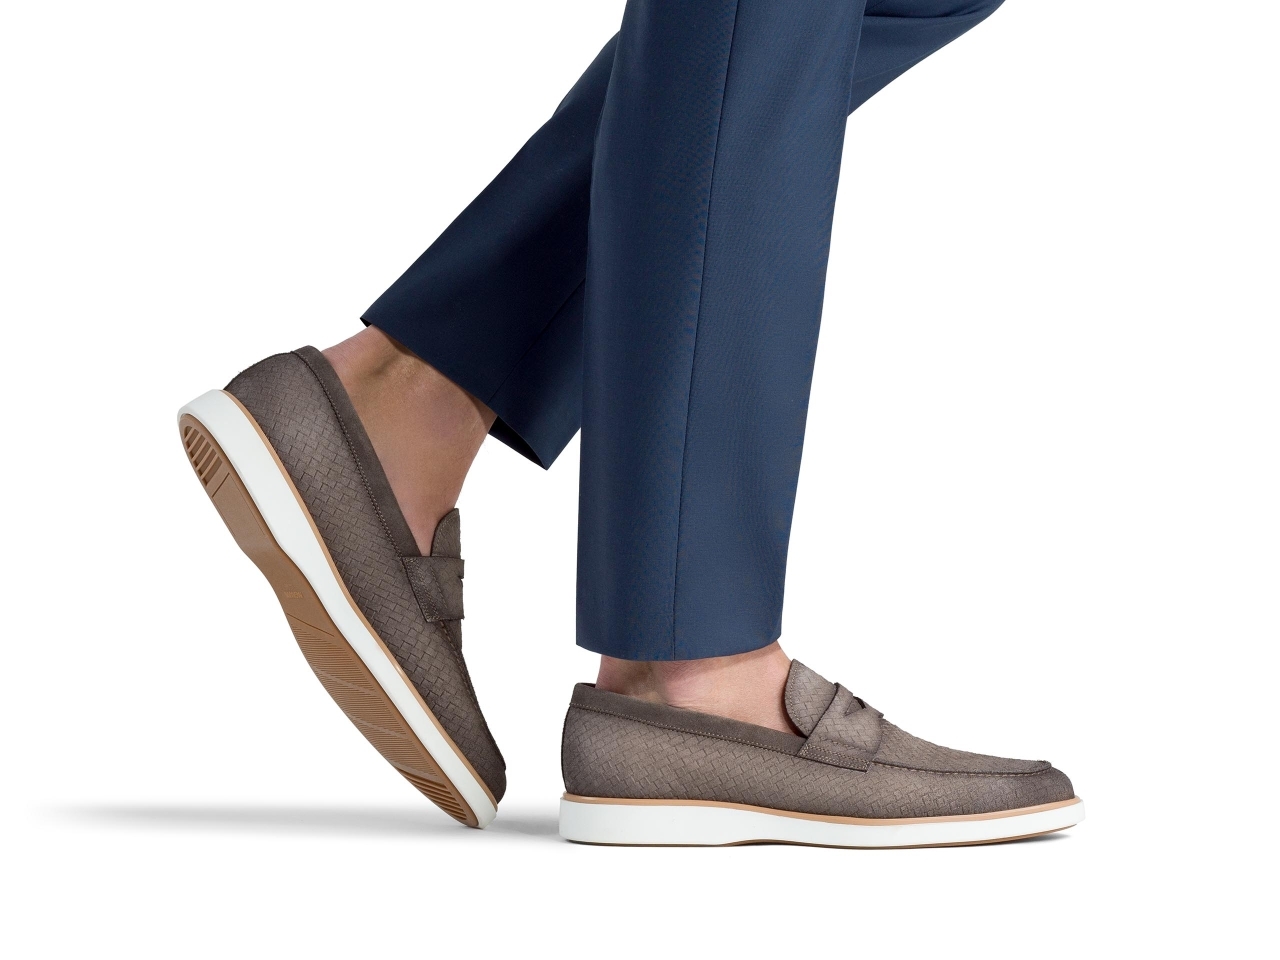 The Lalo Woven Grey Suede pairs well with navy pants